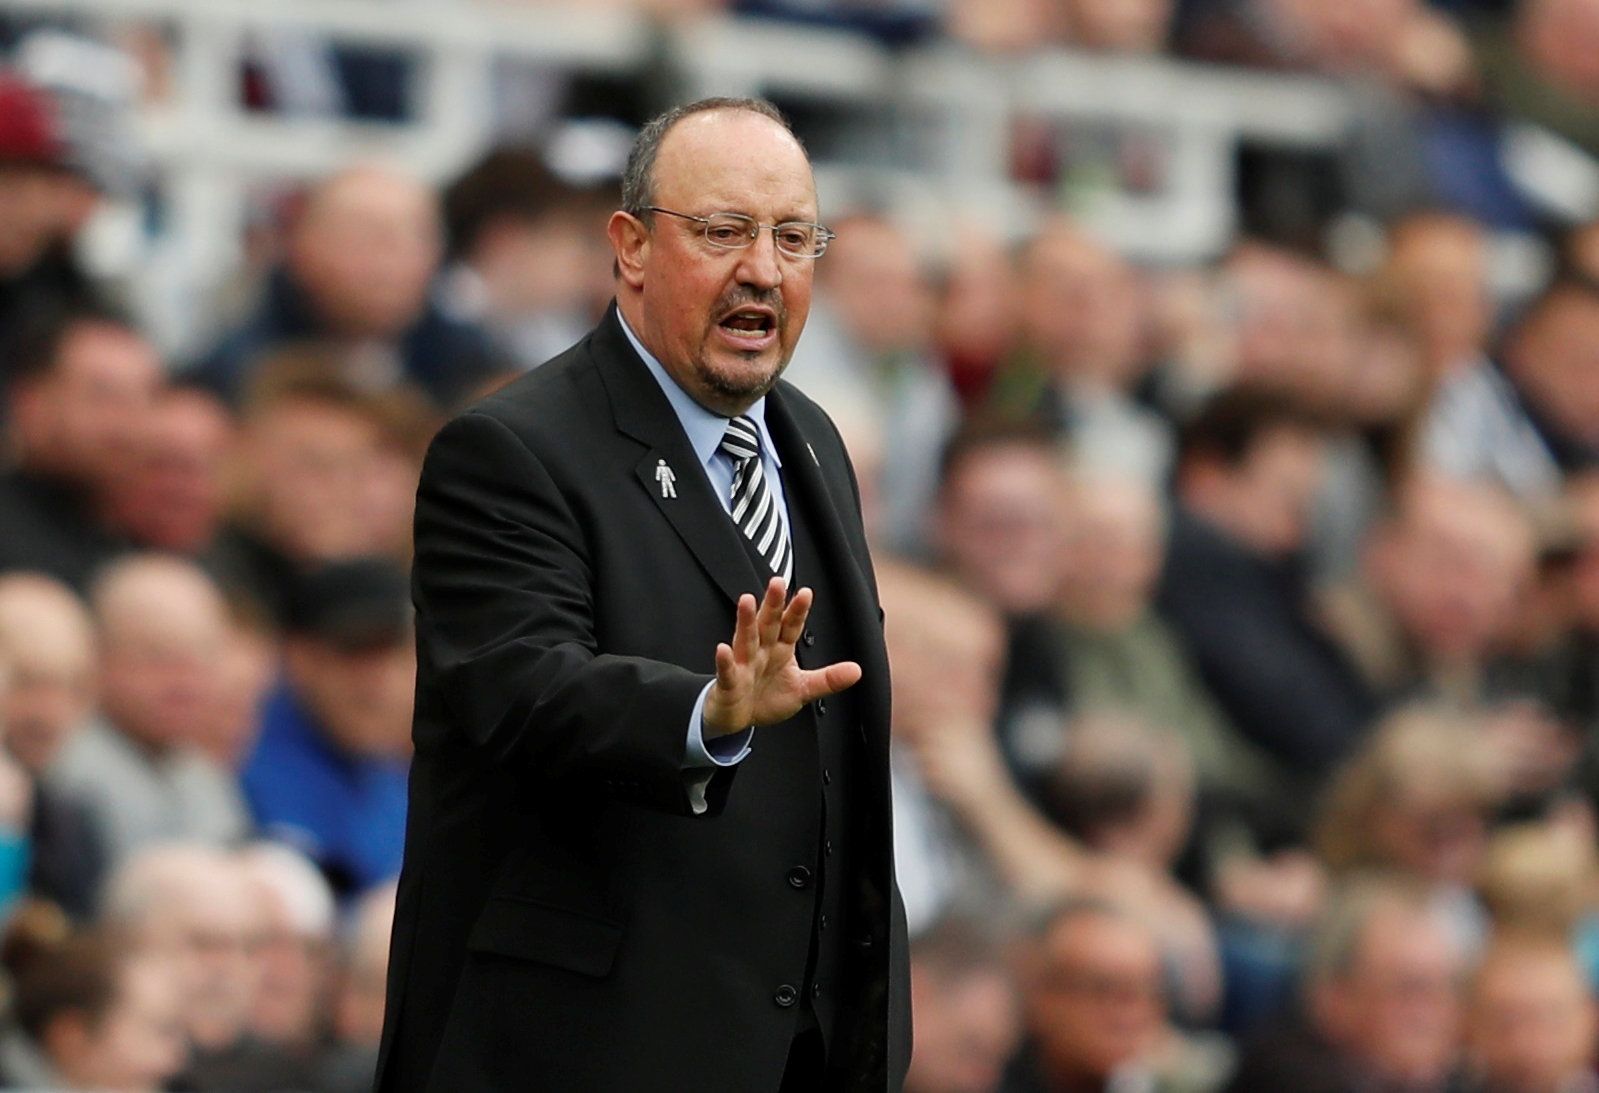 Soccer Football - Premier League - Newcastle United v Brighton &amp; Hove Albion - St James' Park, Newcastle, Britain - October 20, 2018  Newcastle United manager Rafael Benitez gestures during the match        Action Images via Reuters/Lee Smith  EDITORIAL USE ONLY. No use with unauthorized audio, video, data, fixture lists, club/league logos or 